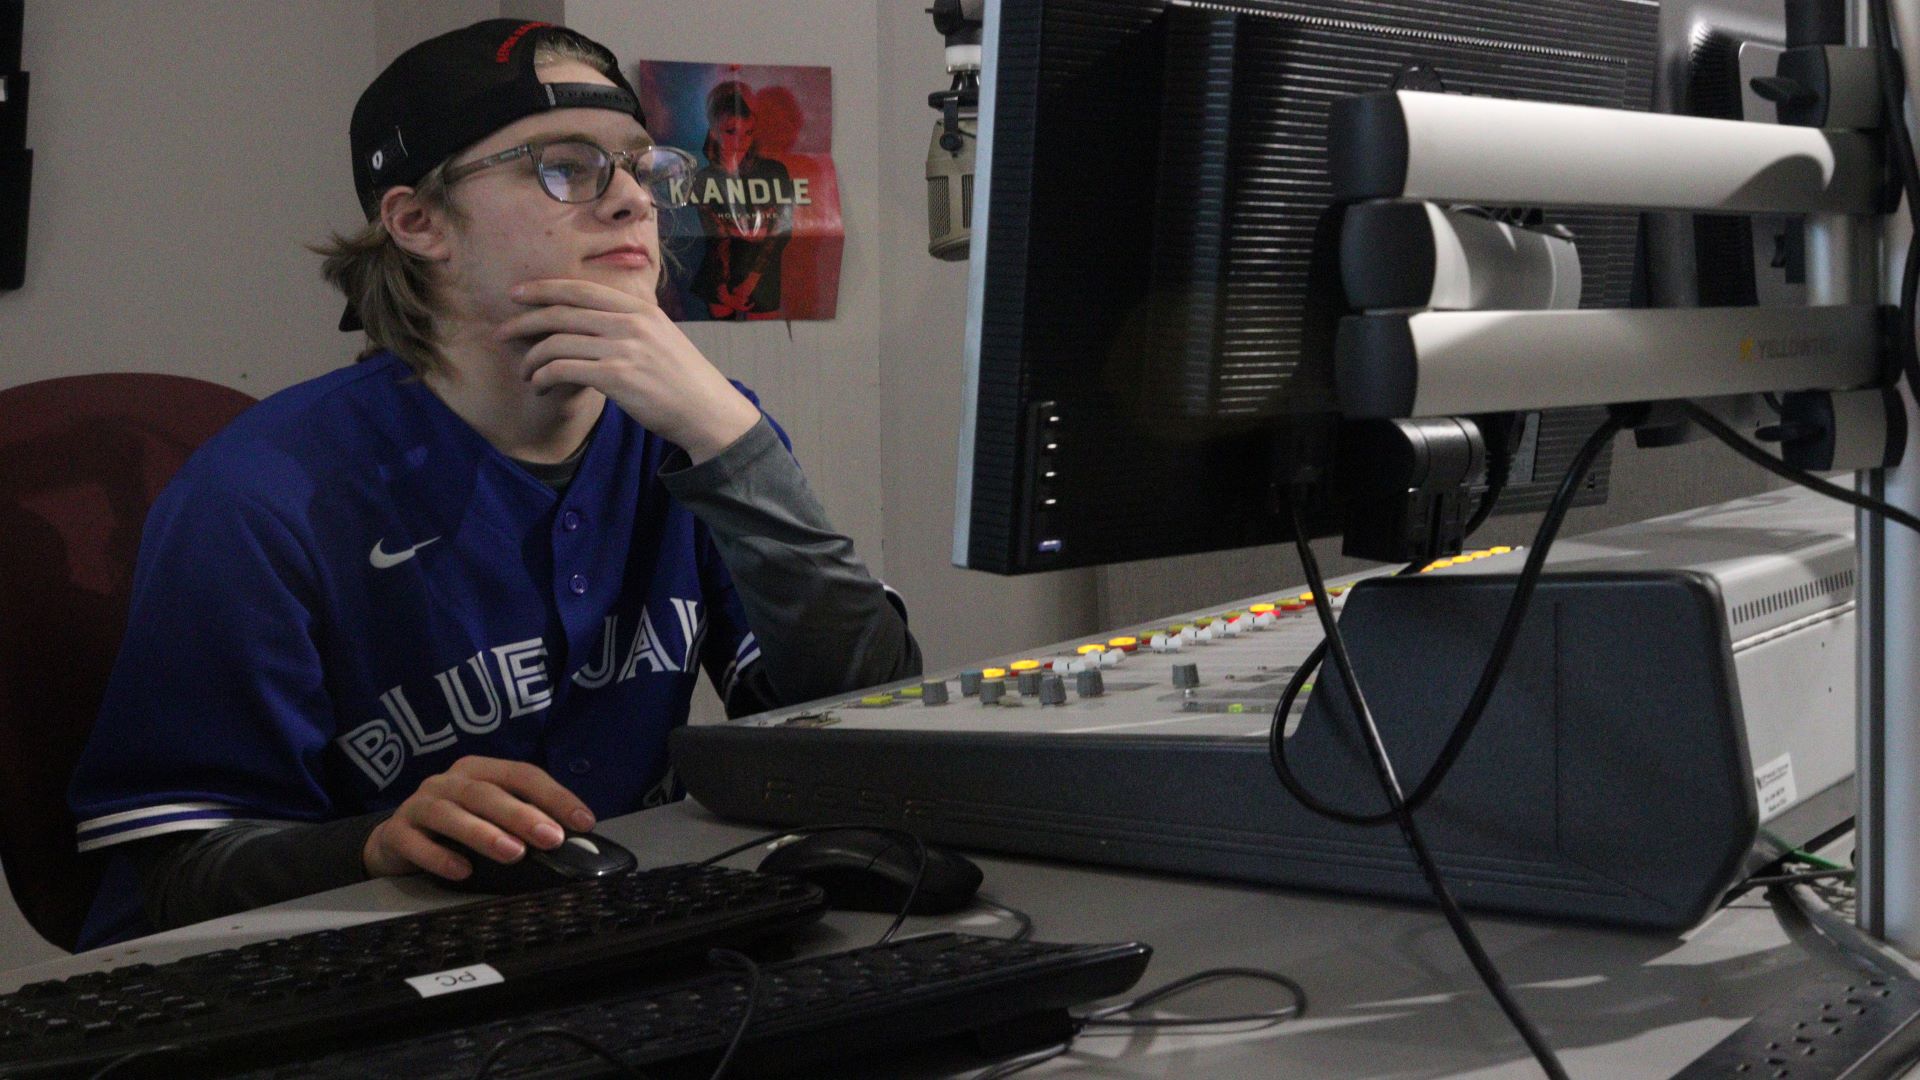 Tyler Cyr, a first-year radio broadcasting student at the college, editing audio files sporting his Blue Jays jersey with thoughts of attending baseball games this summer.